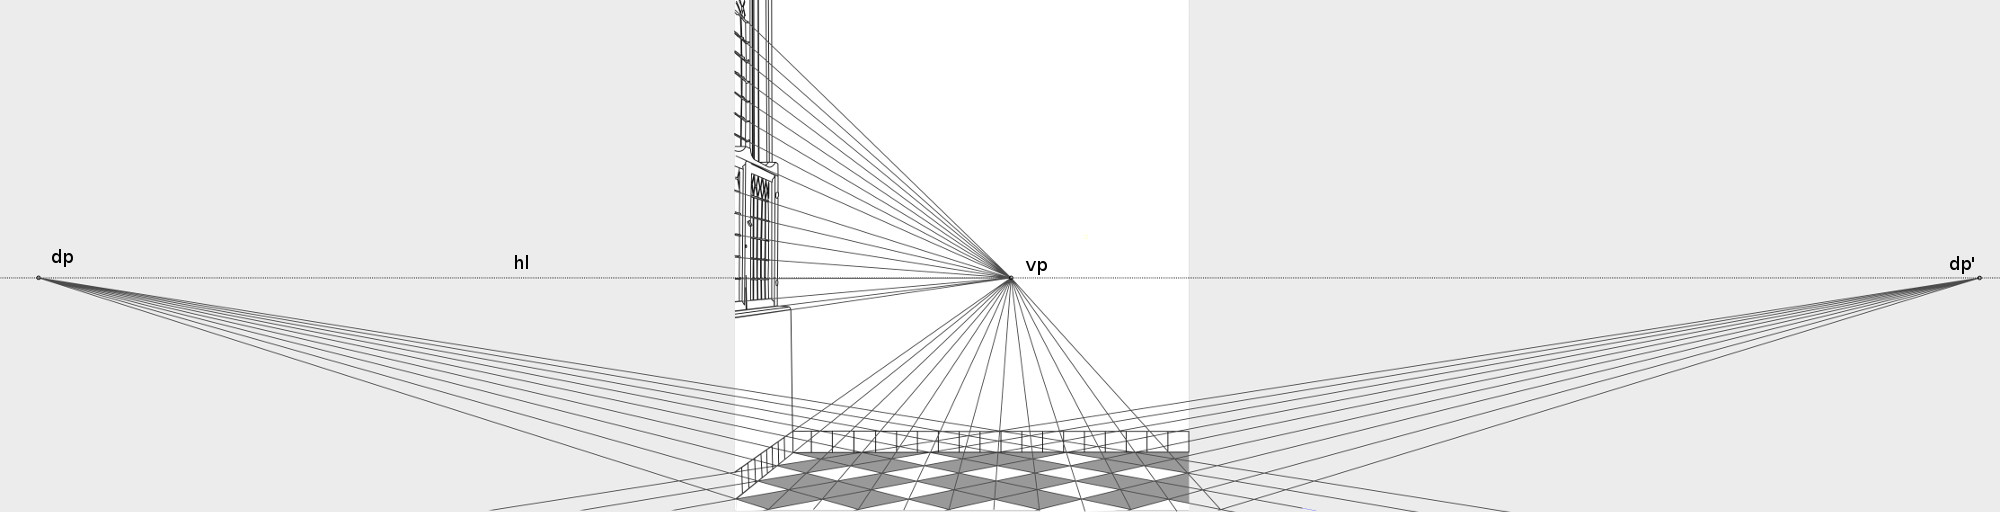 Perspective reconstruction of Vermeer's A Lady Standing at a Virginal, showing the orthogonals, the vanishing point (vp), the horizon line (hl) and distance points (dp and dp') 
